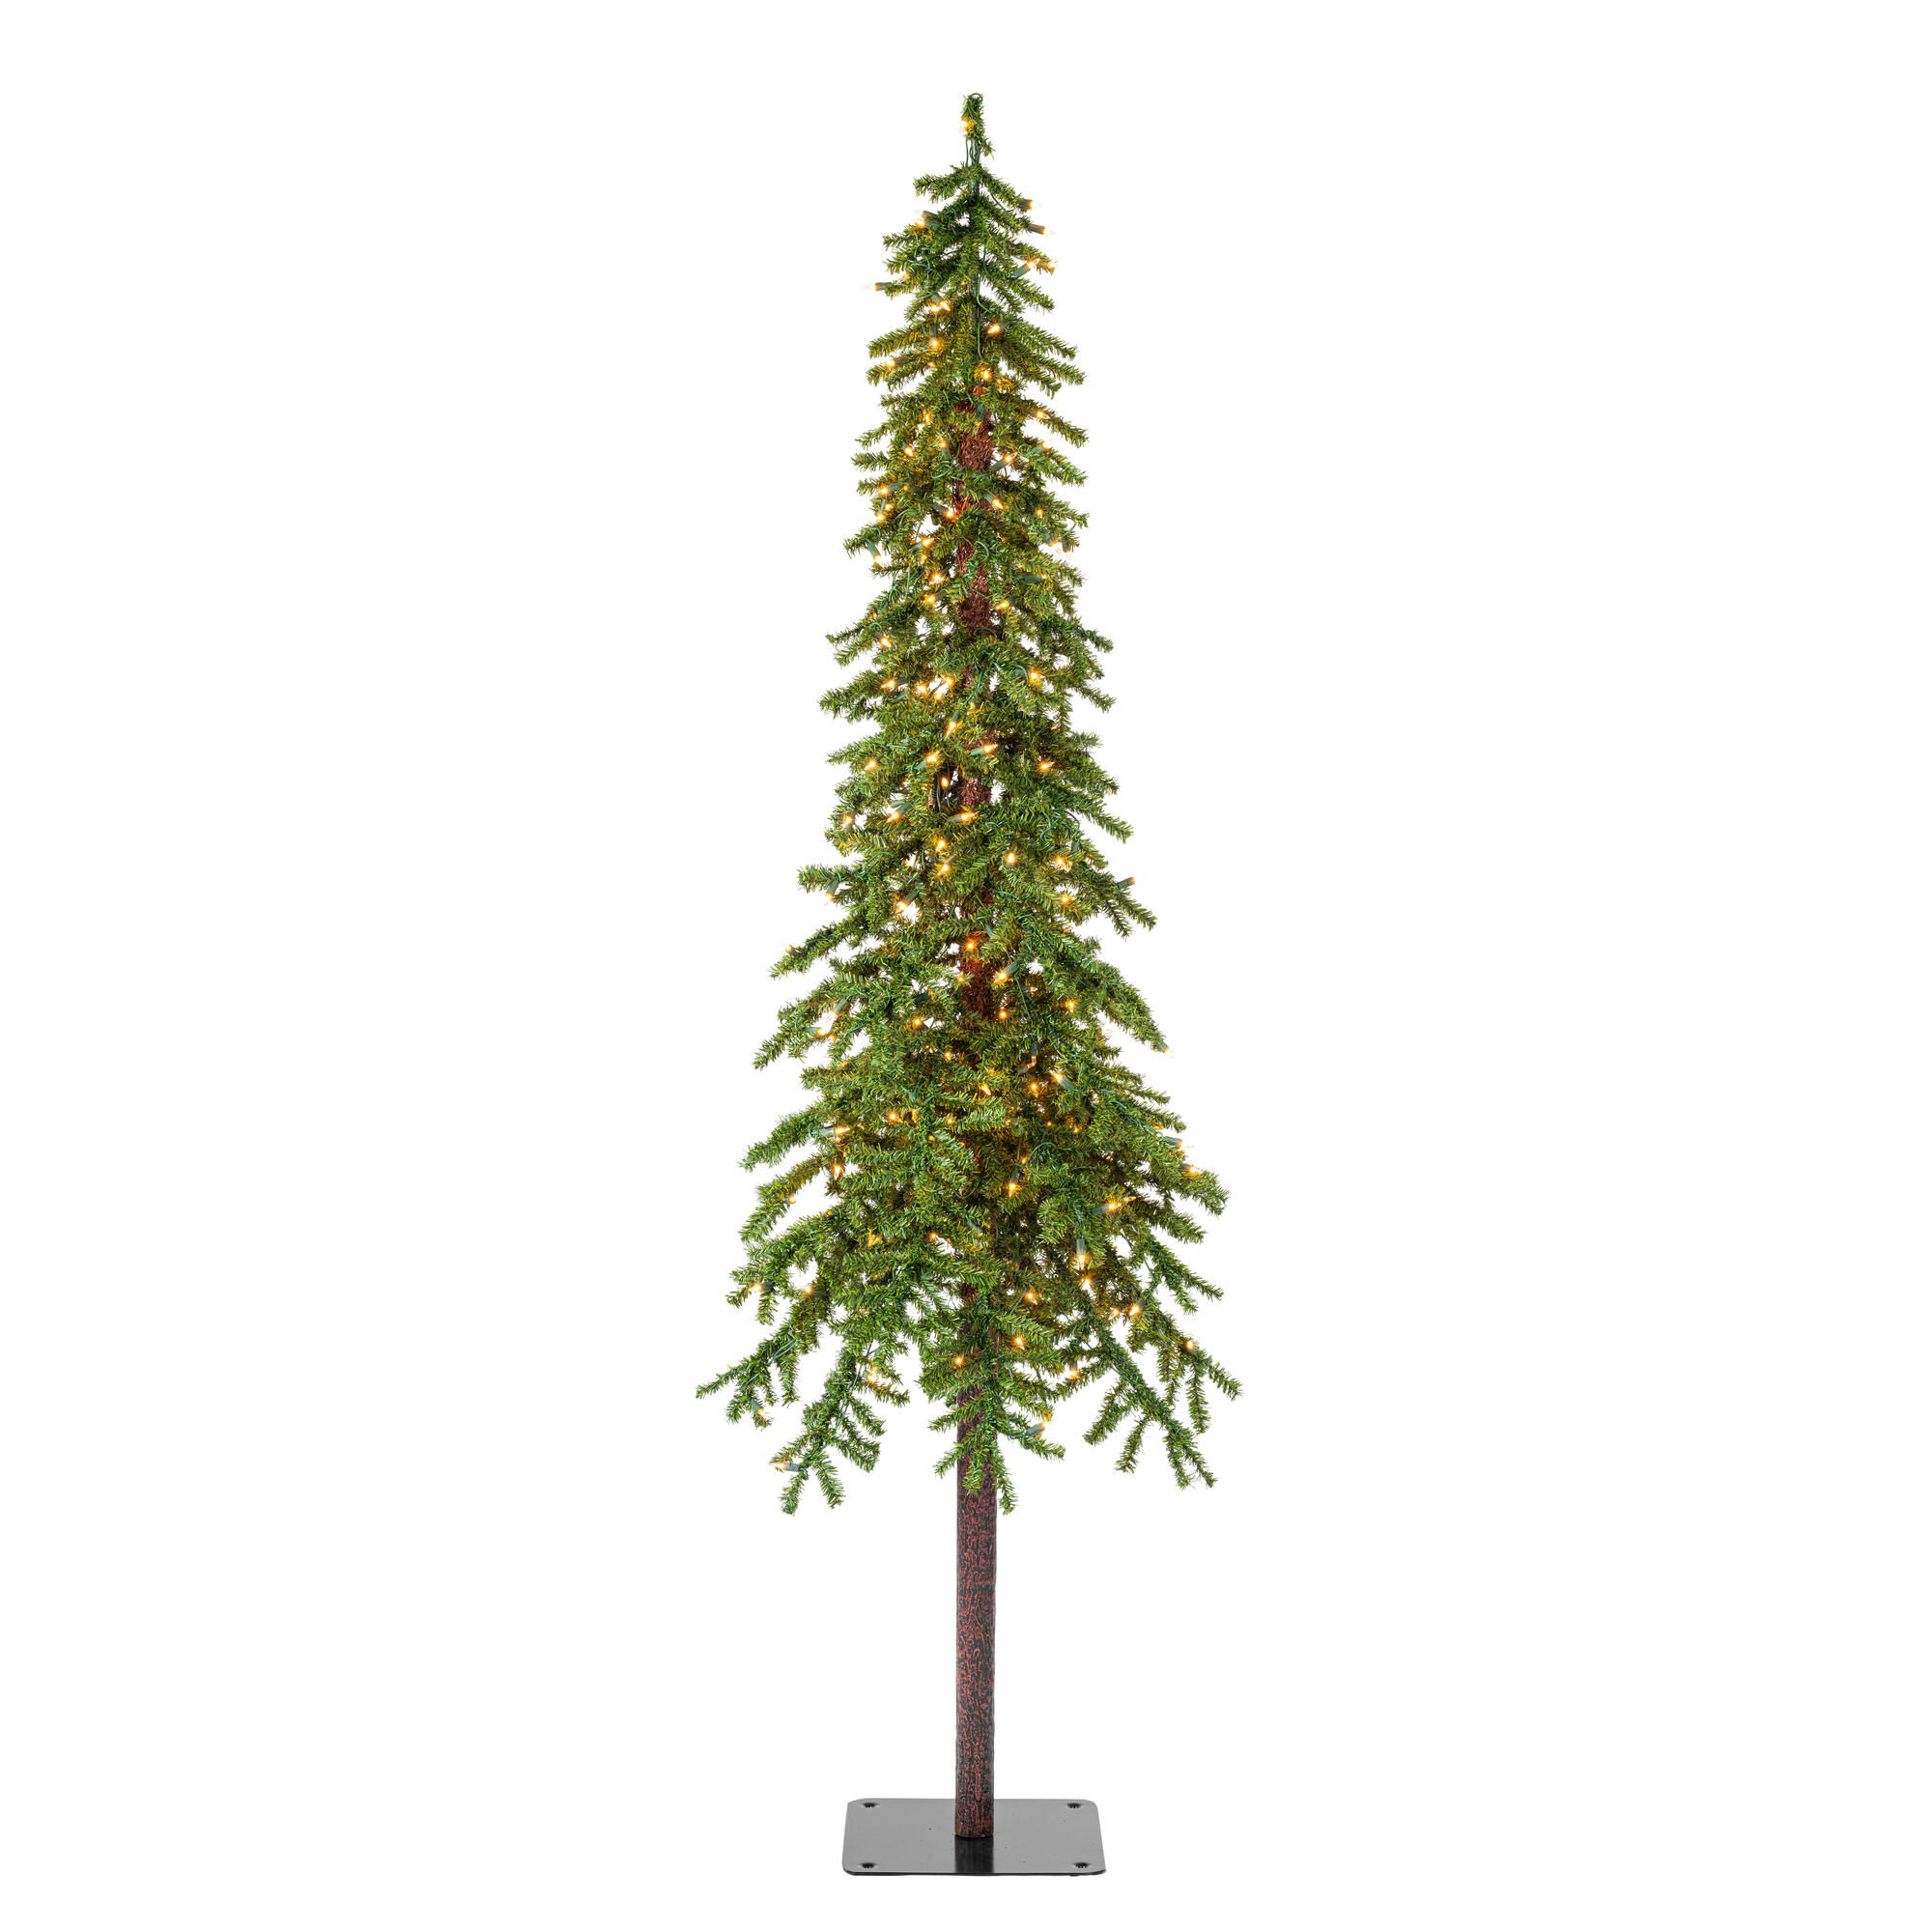 Vickerman 7' x 44" Natural Alpine Artificial Christmas Tree with 921 PVC tips and 300 clear lights. - image 1 of 6